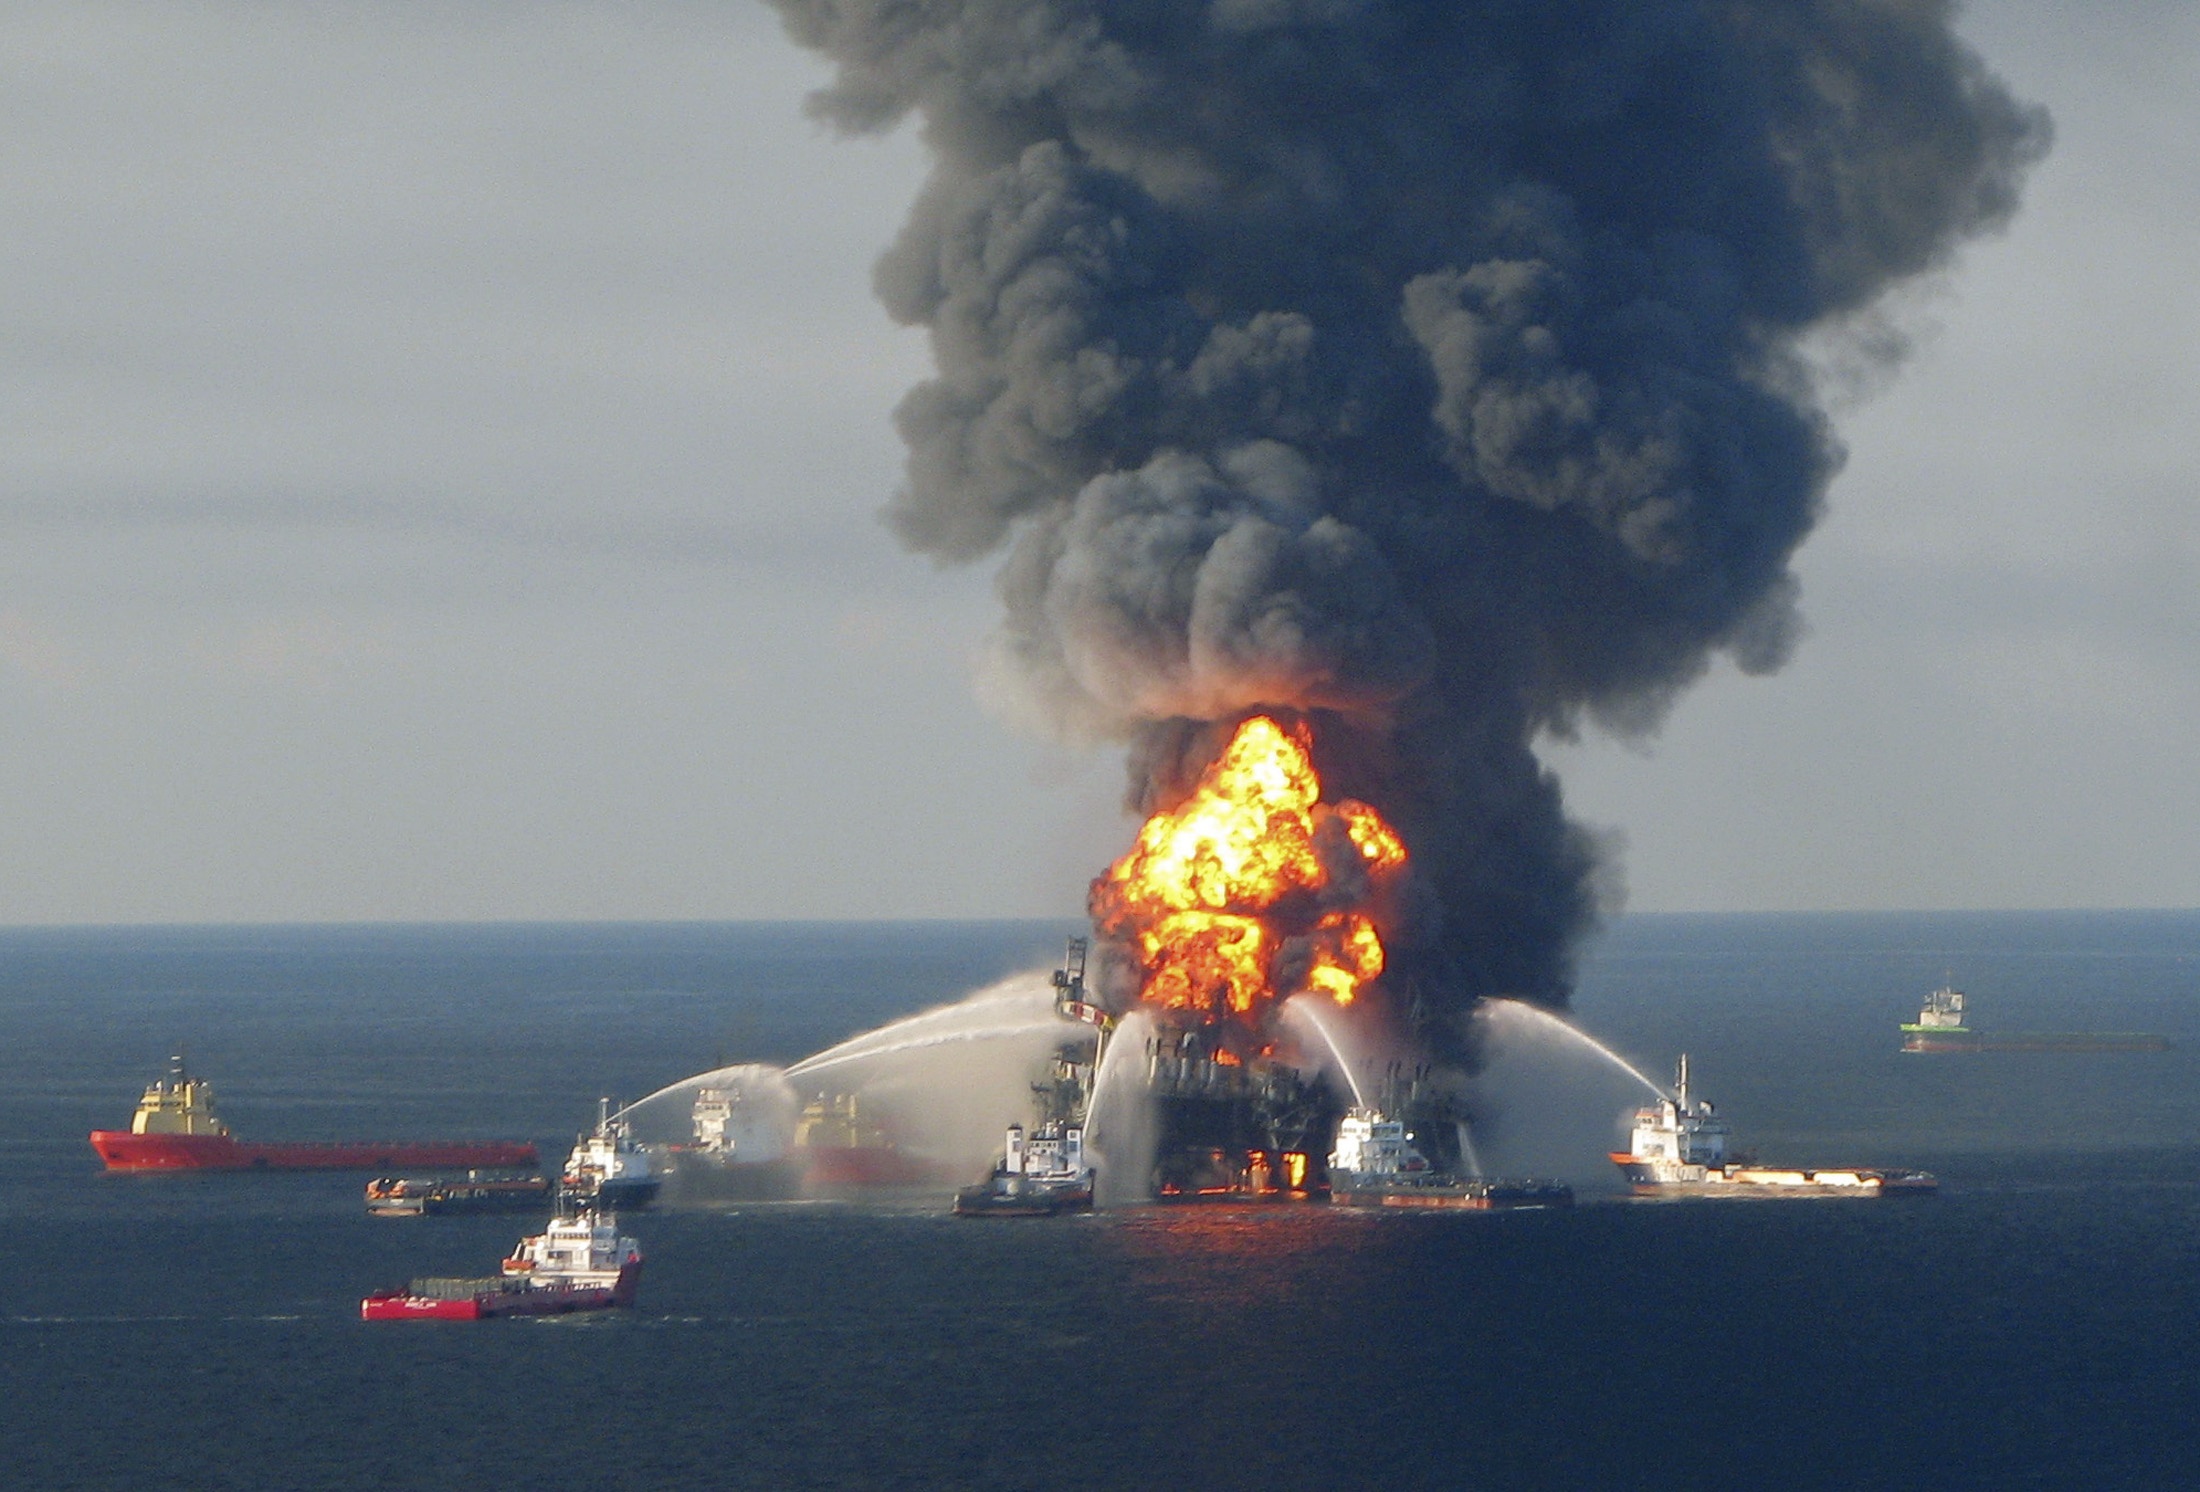 Robert Kaluza and Donald Vidrine were the two highest-ranking supervisors on board the Deepwater Horizon when it exploded on April 20, 2010, spilling oil into the gulf of Mexico. Photo: Reuters.